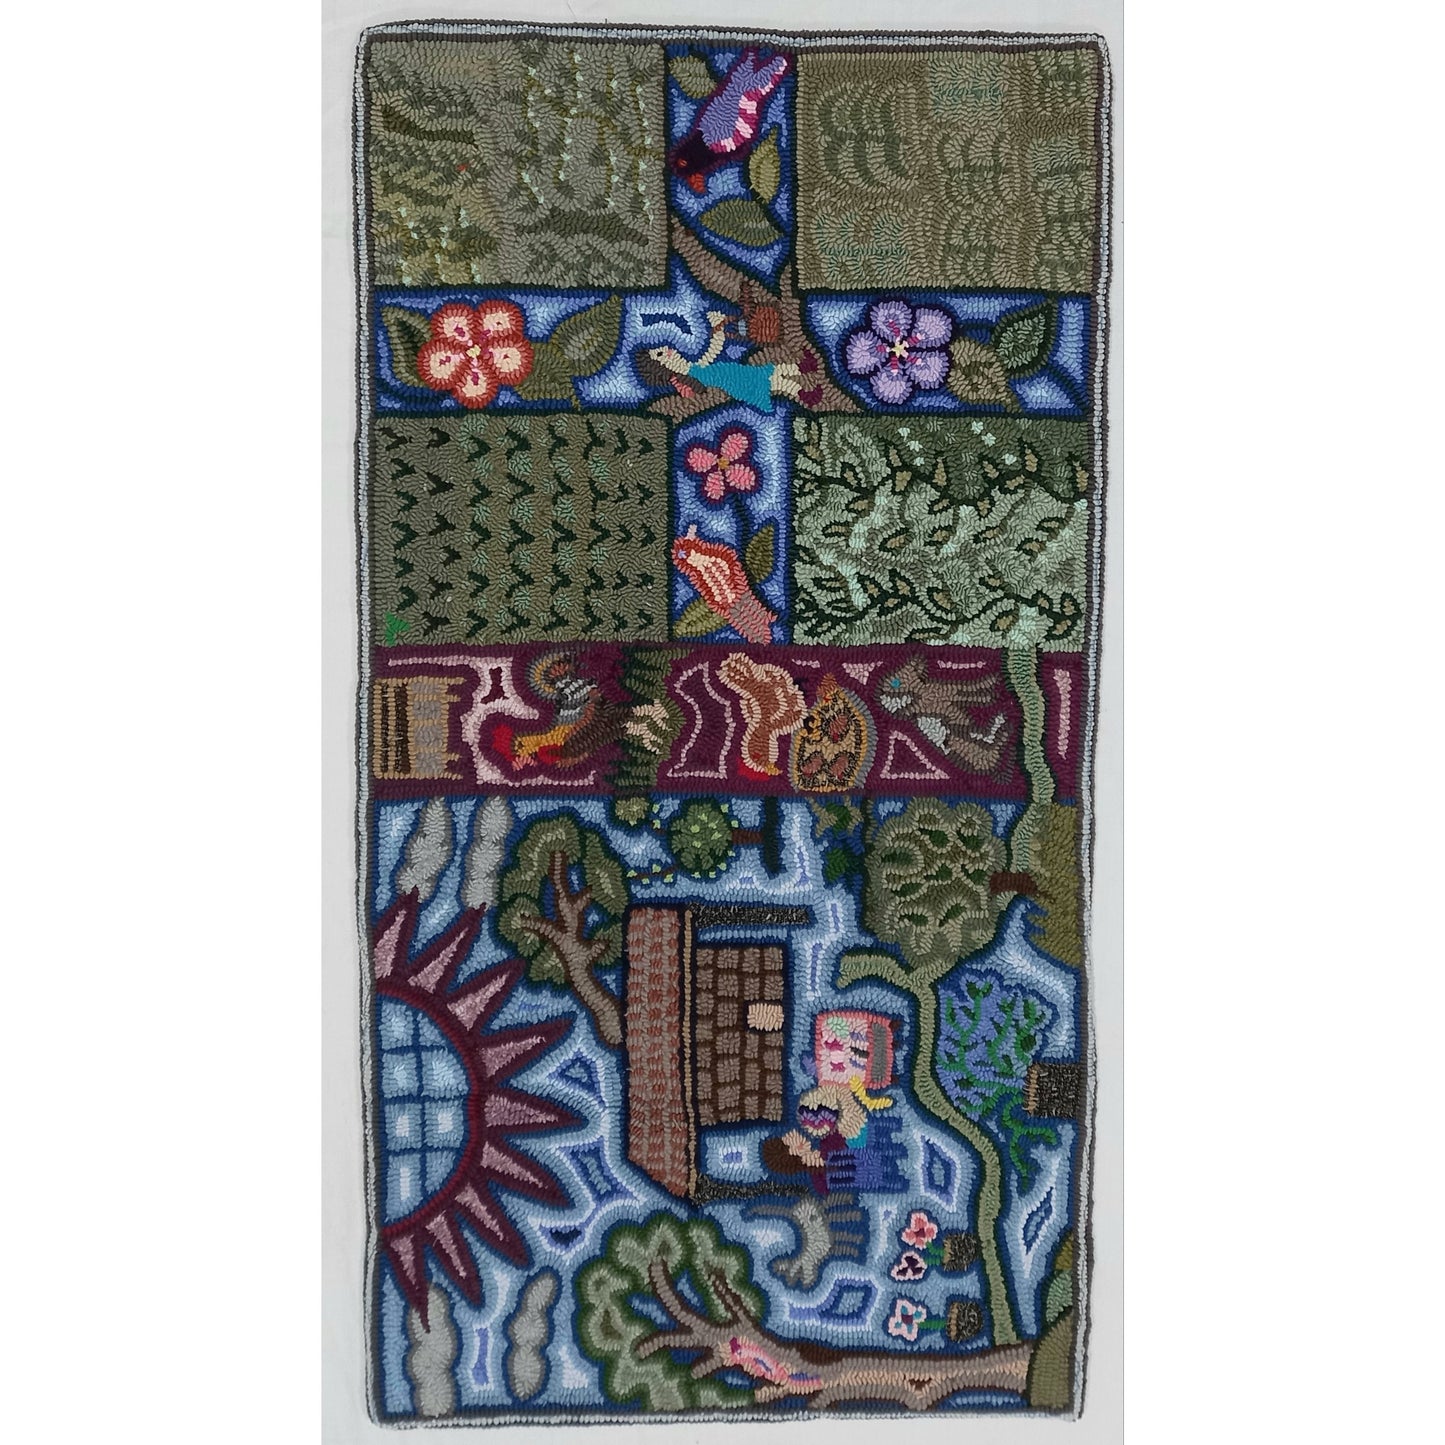 Guatemala, Multicolores, “My Story of the Pandemic” Rug